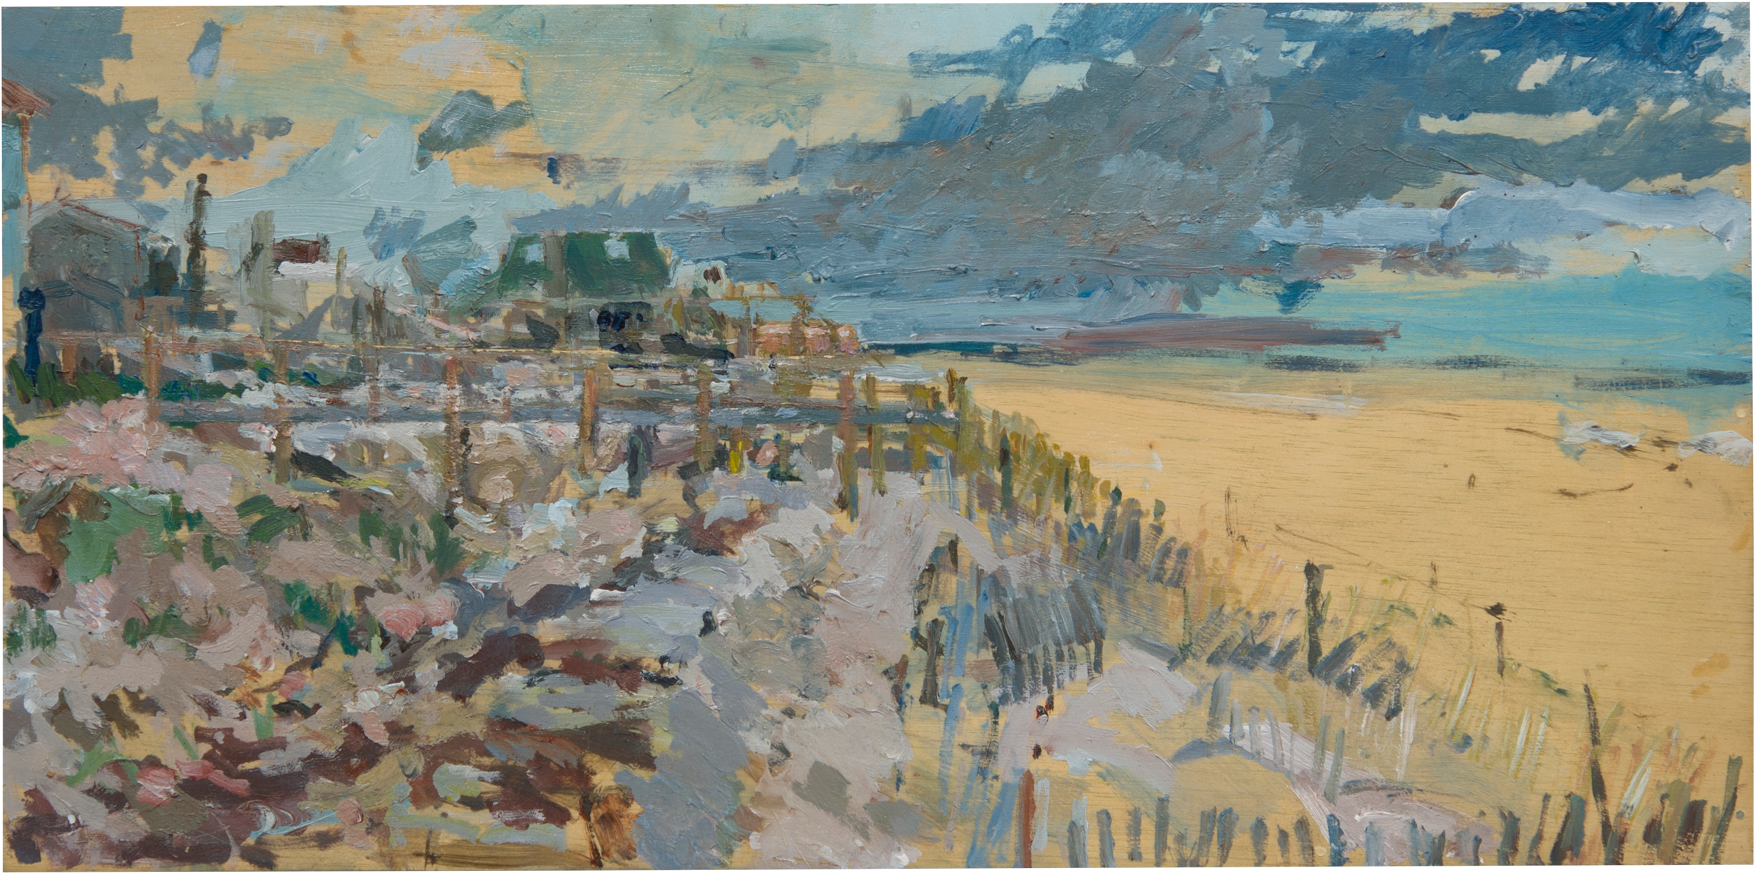     Fire Island, Looking East Oil on Panel 12” x 24”     